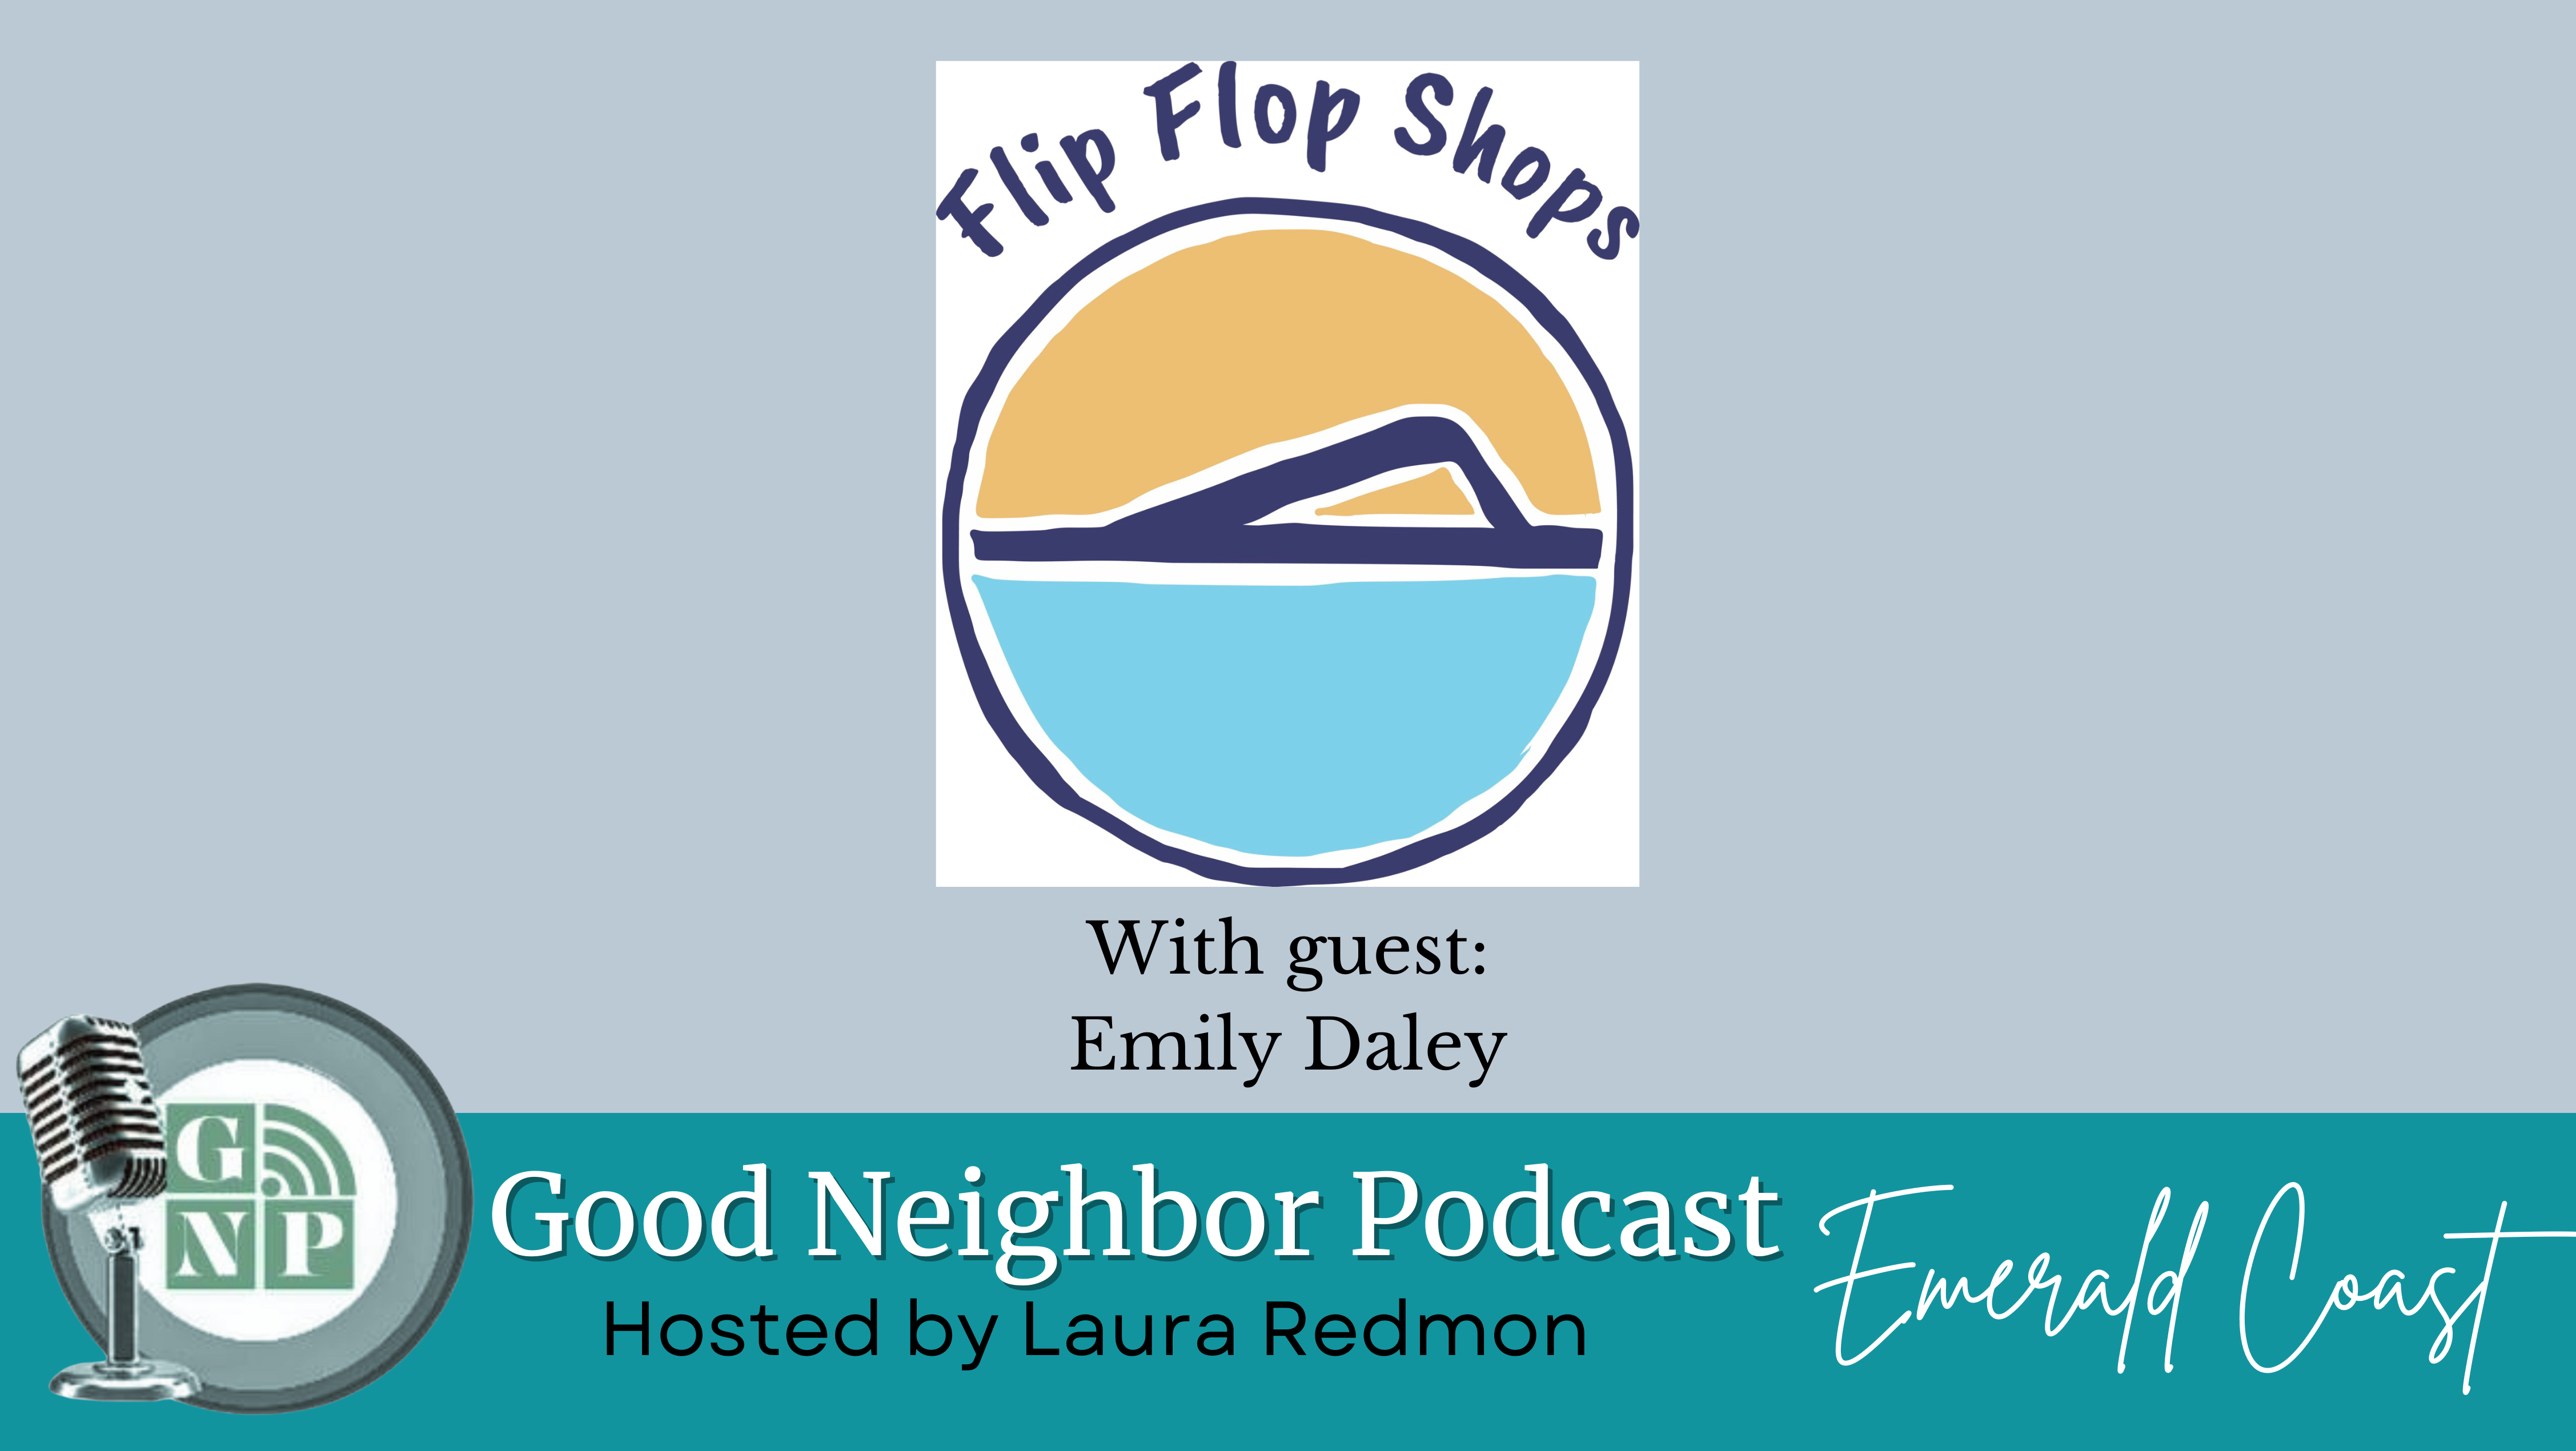 EP #36: Emily Daley of The Flip Flop Shops Crestview